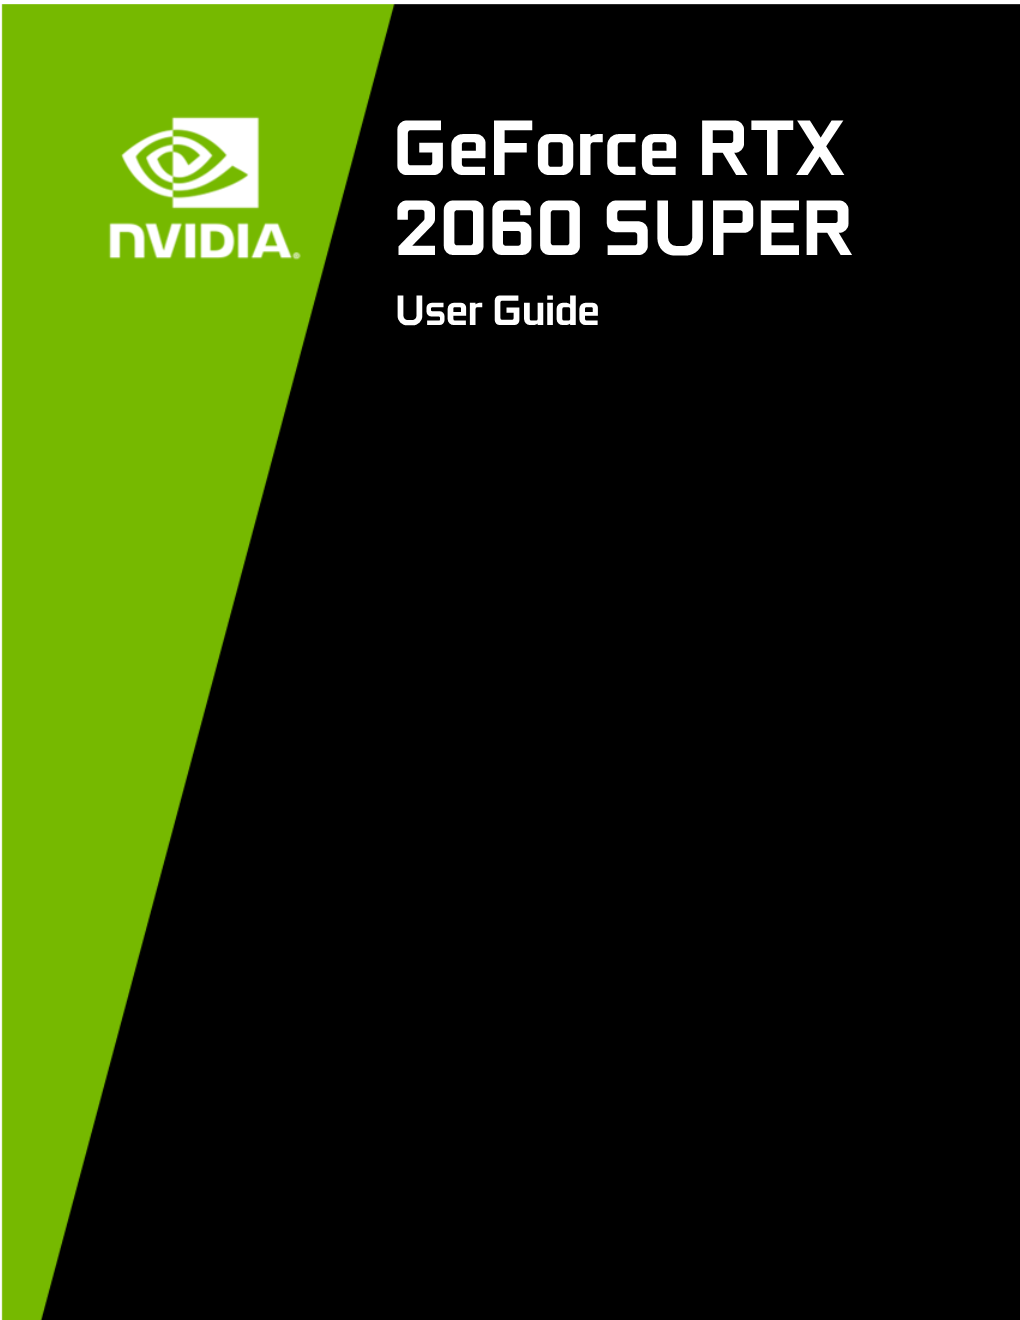 NVIDIA Geforce RTX 2060 SUPER User Guide | 3 Introduction